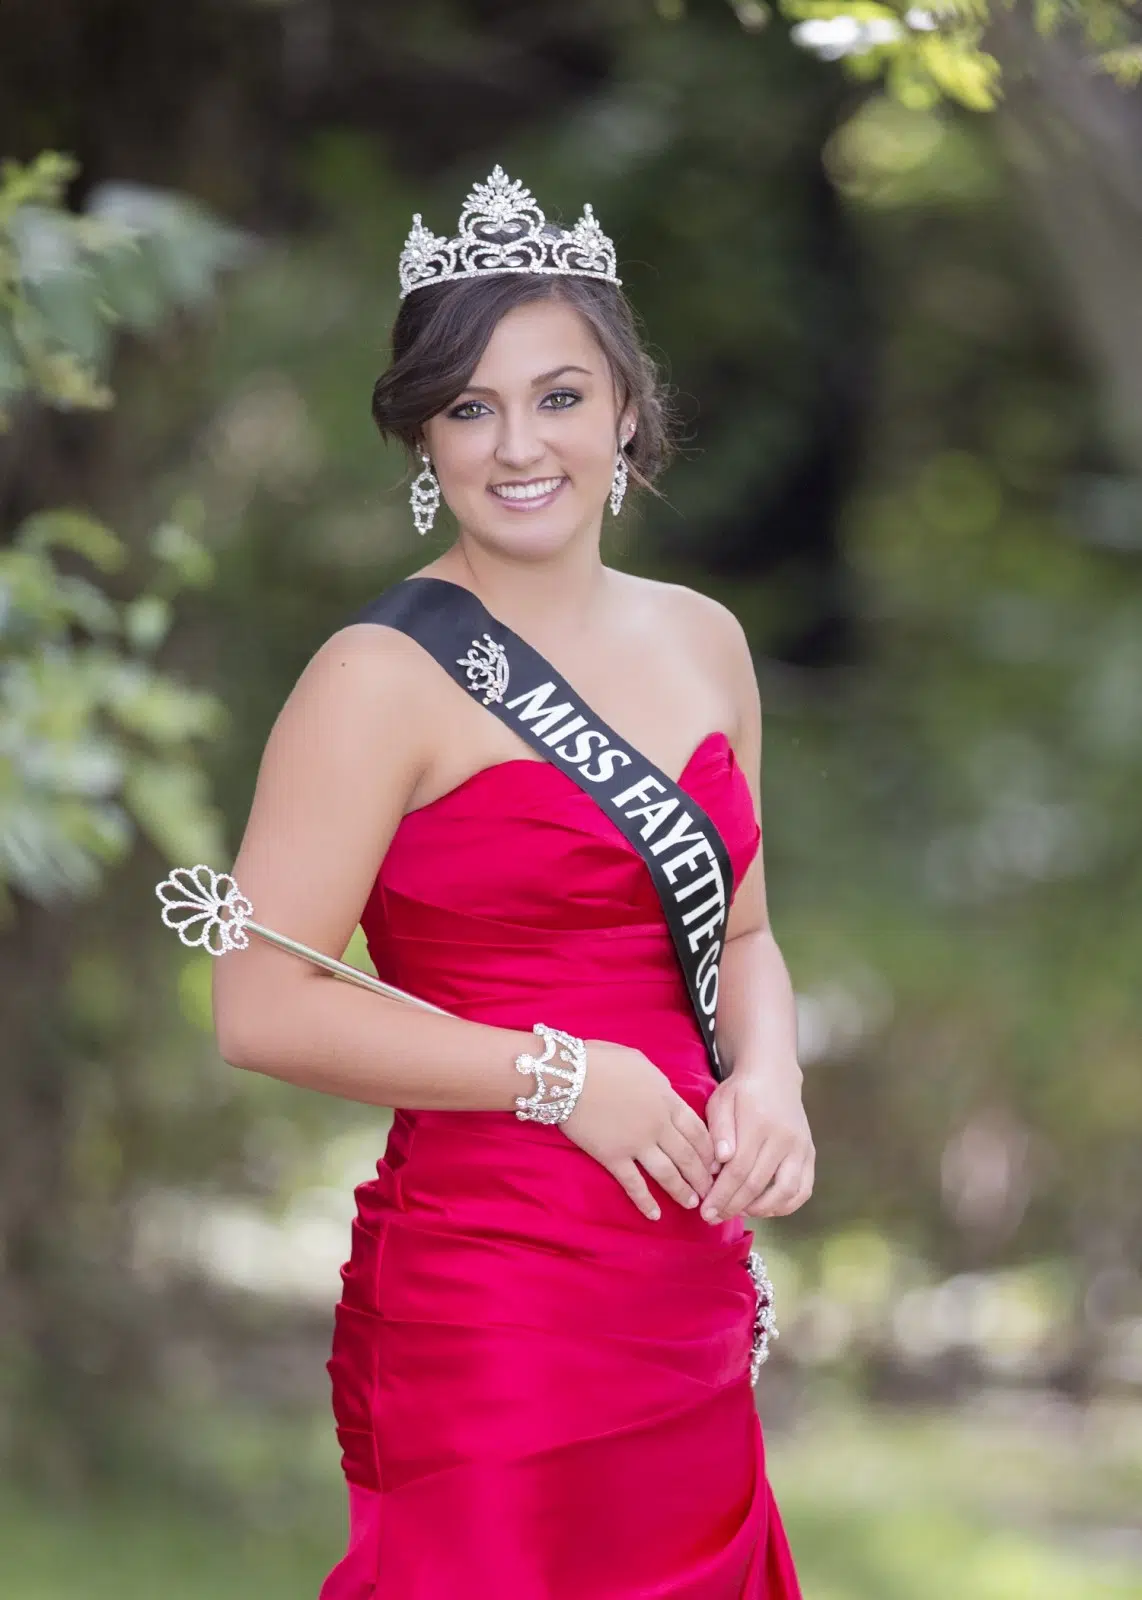 Miss Fayette County Fair Queen 2015 Jenna Hunt will compete at Miss Illinois County Fair Queen Pageant